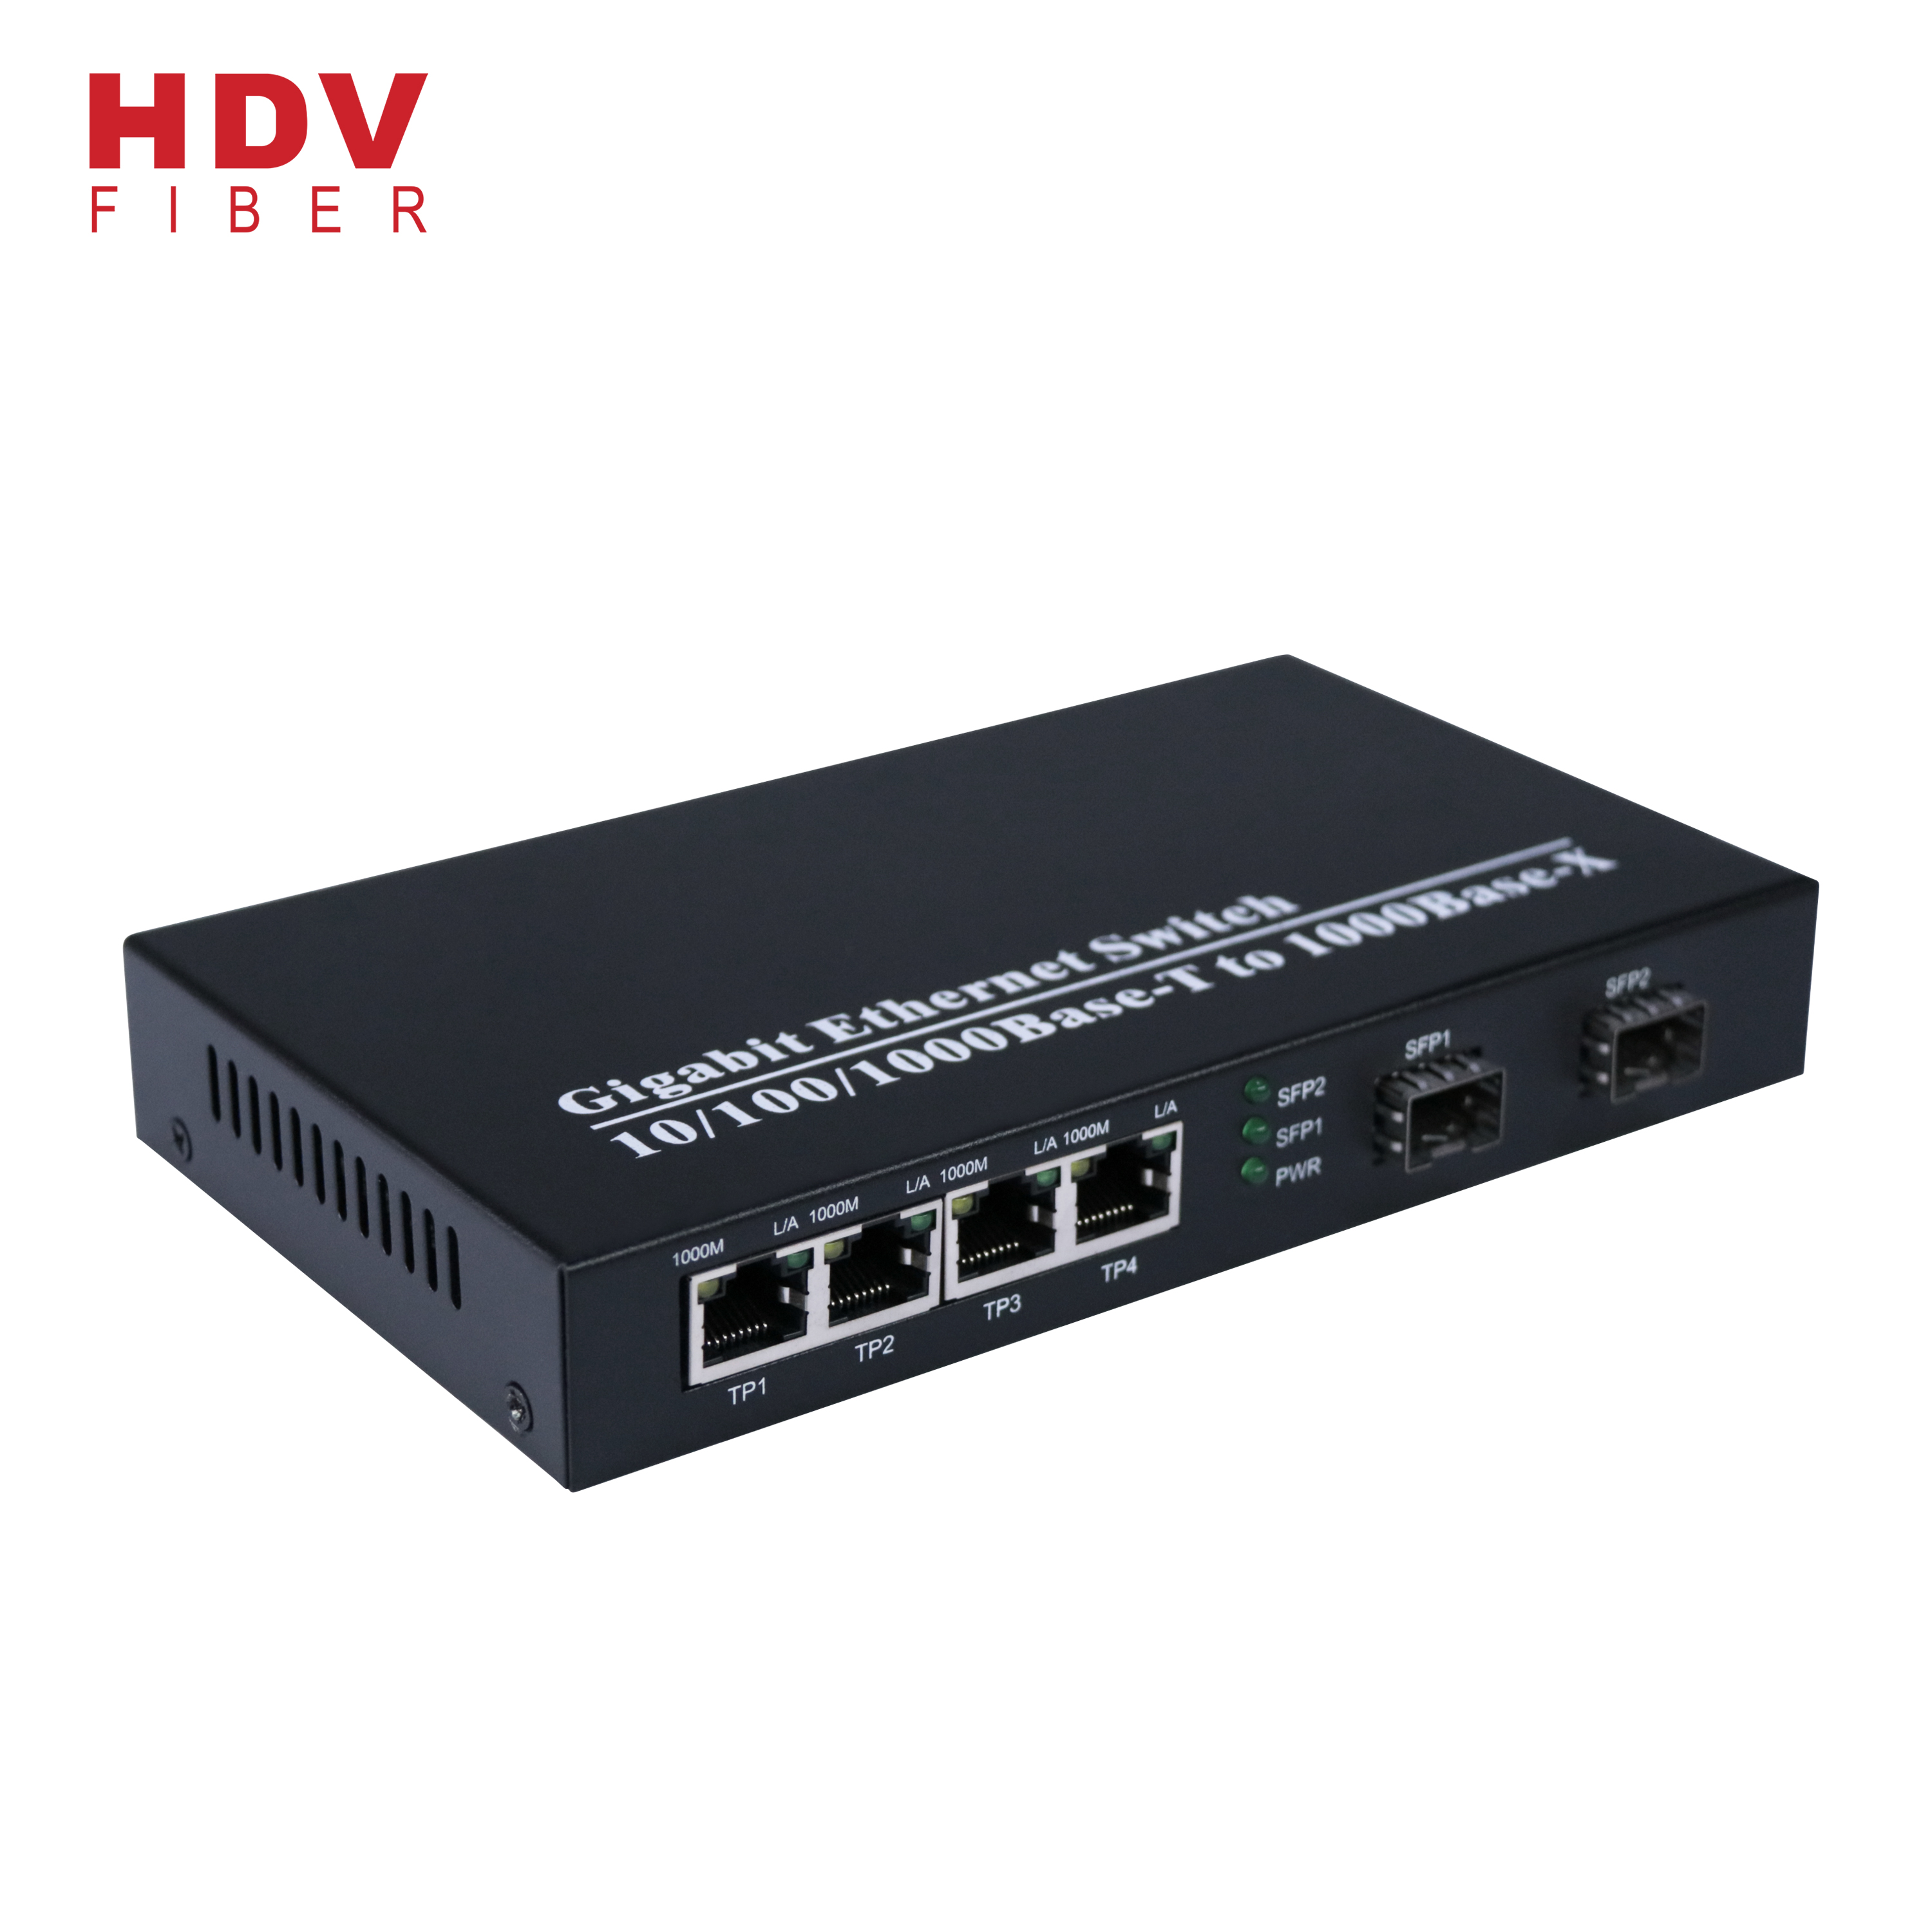 Industrial 4-Port Gigabit Ethernet Switch with 2 SFP Ports